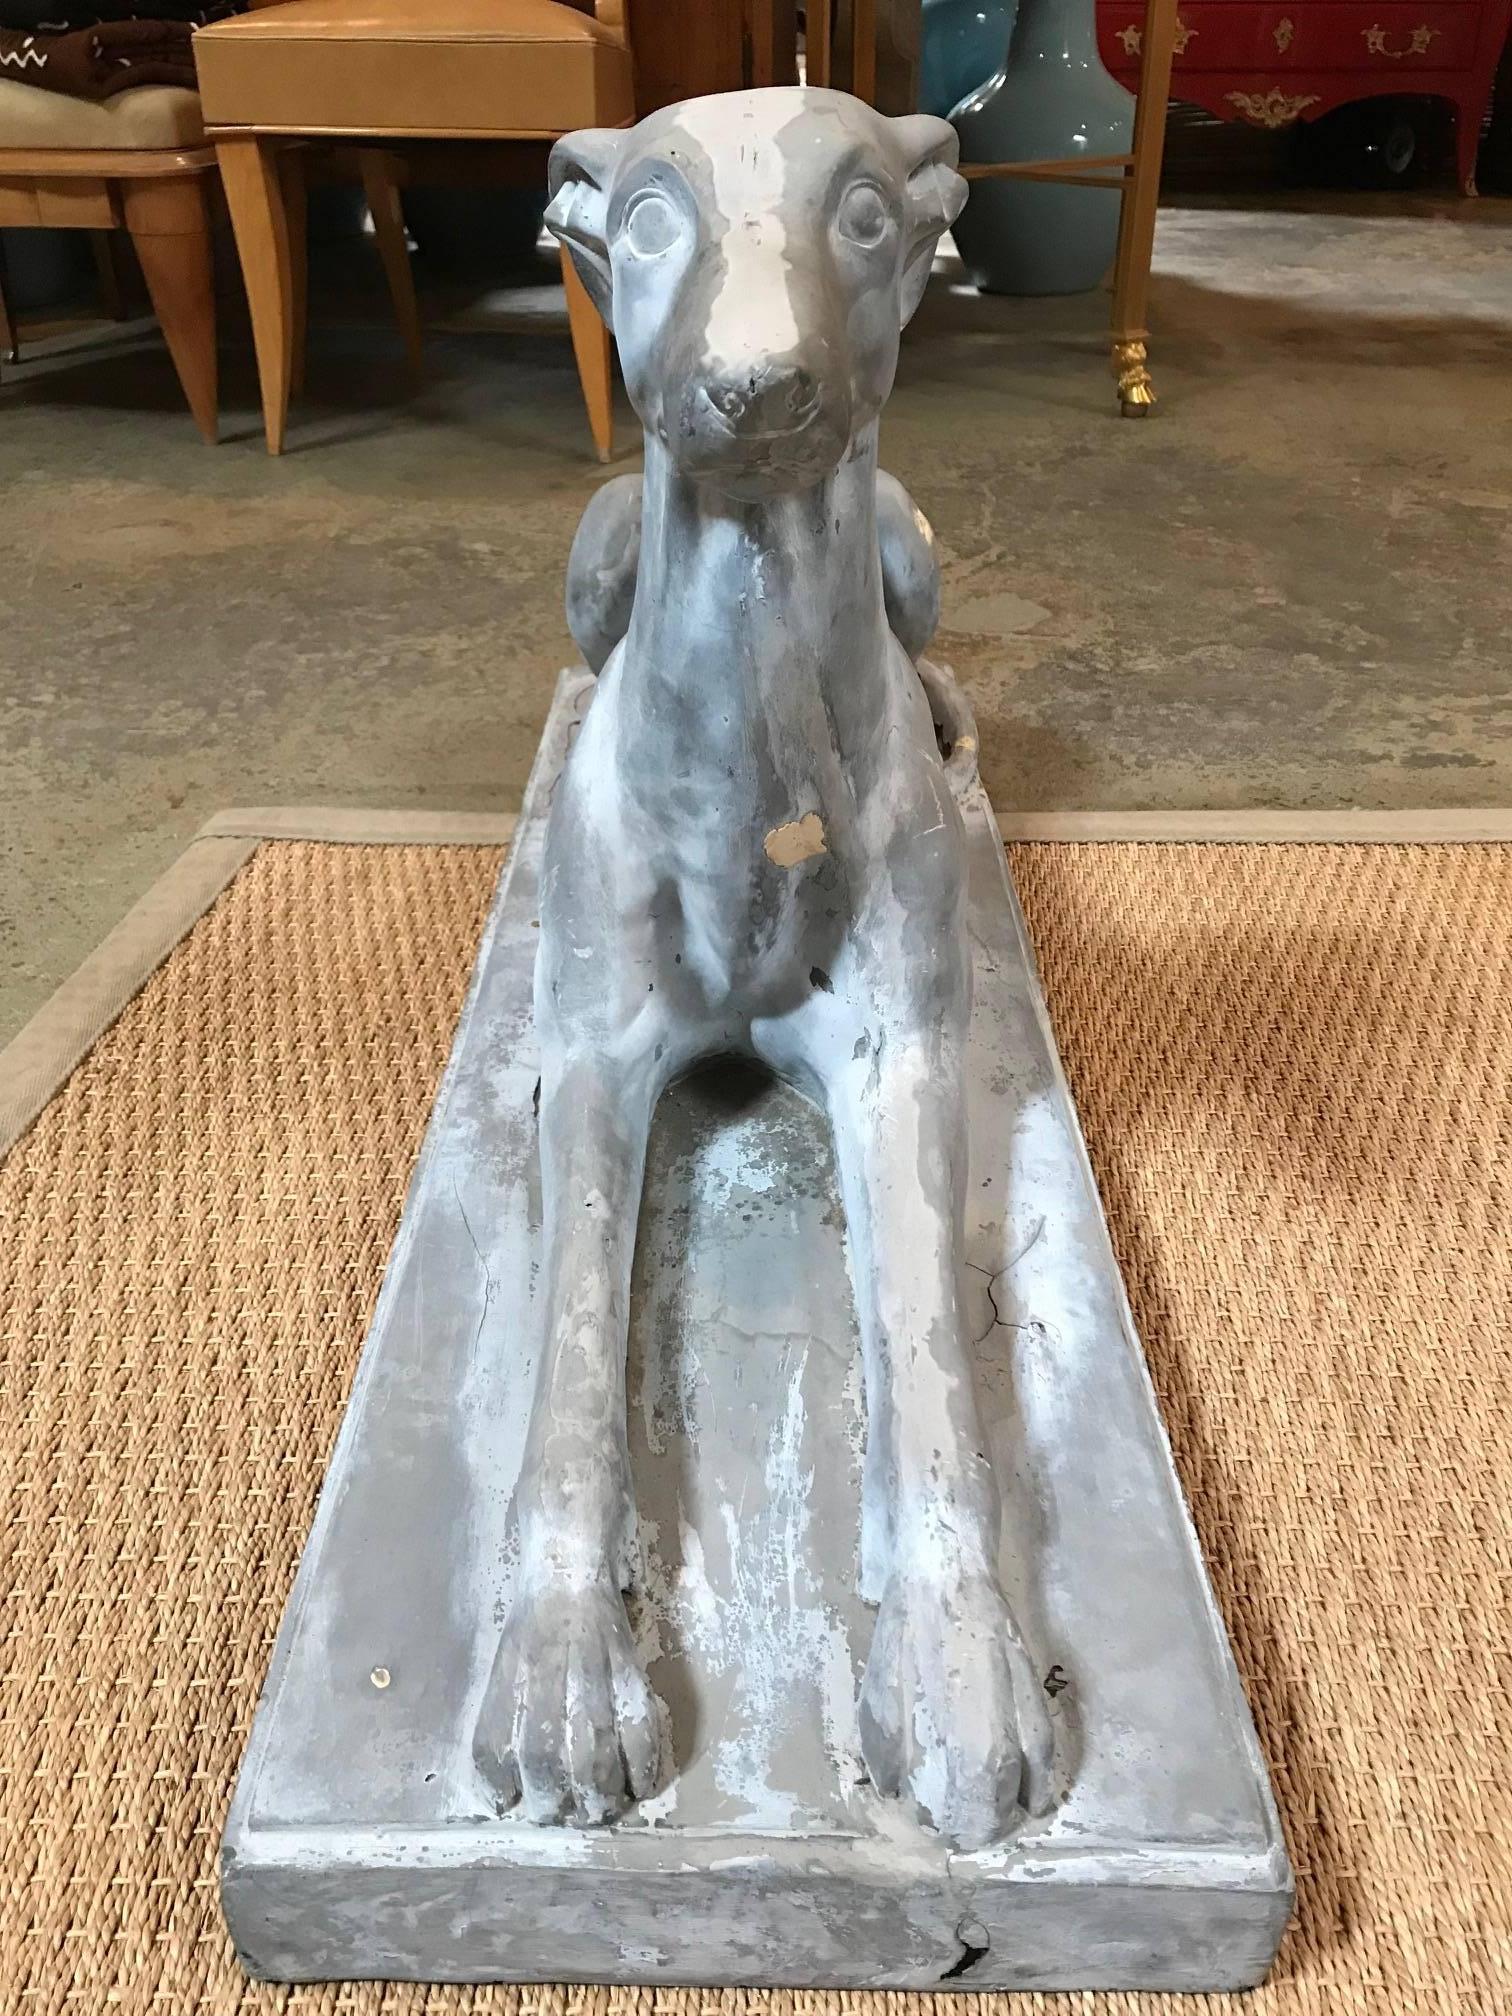 whippet for sale